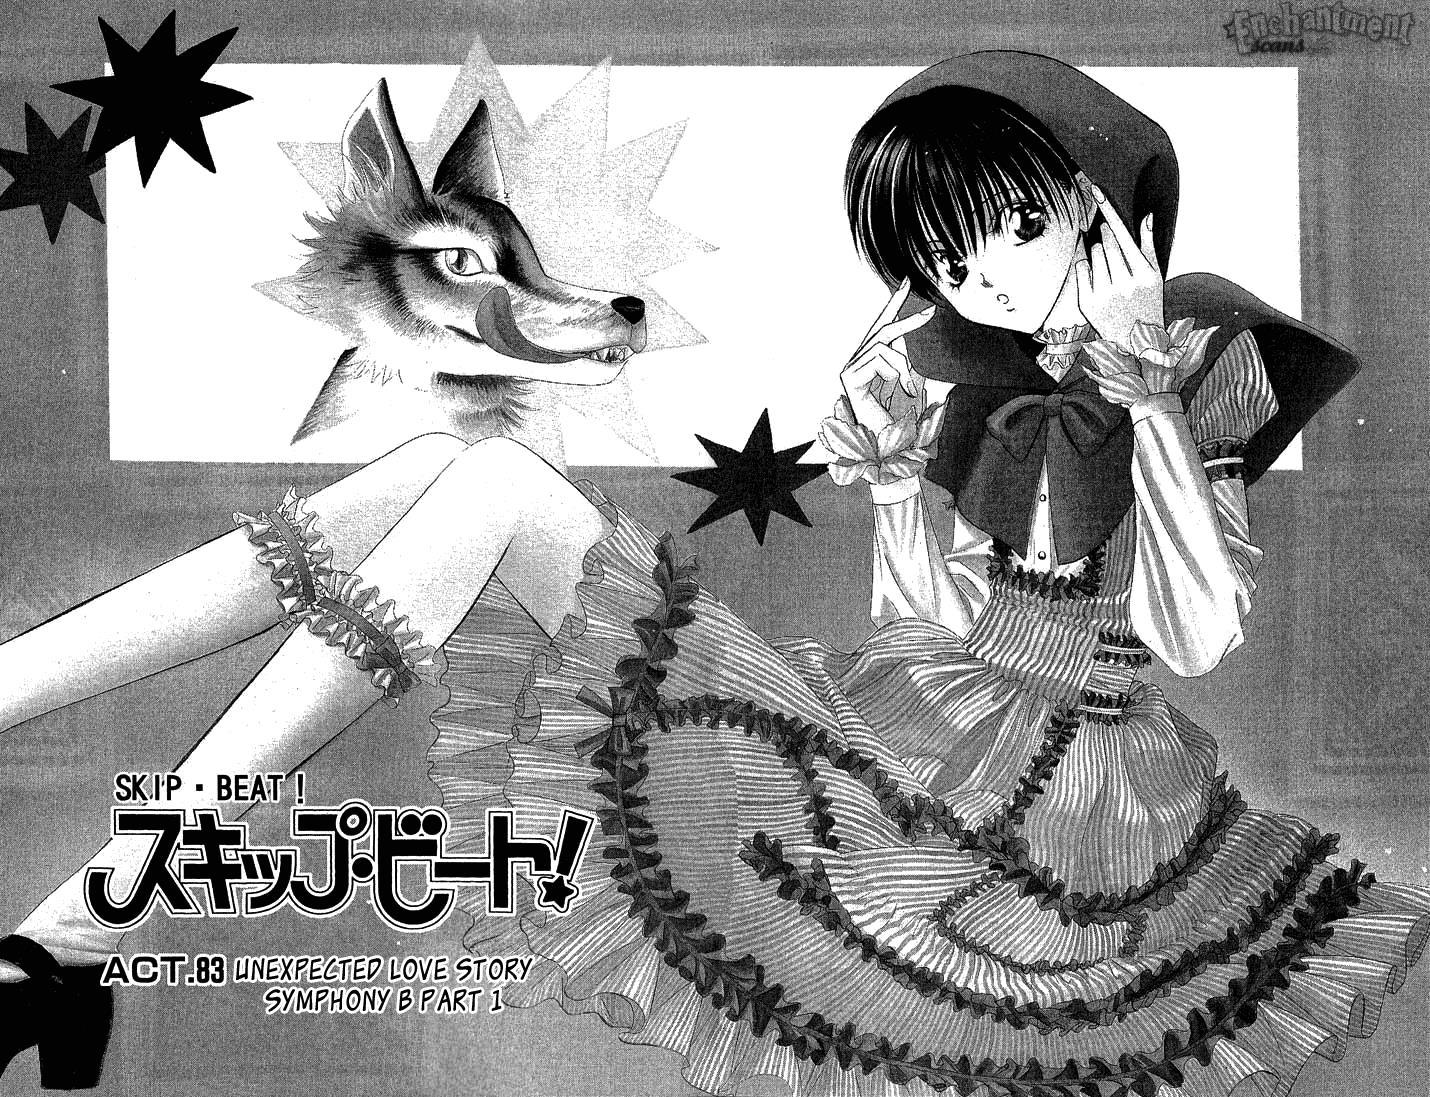 Skip Beat!, Chapter 83 Suddenly, a Love Story- Section B image 02